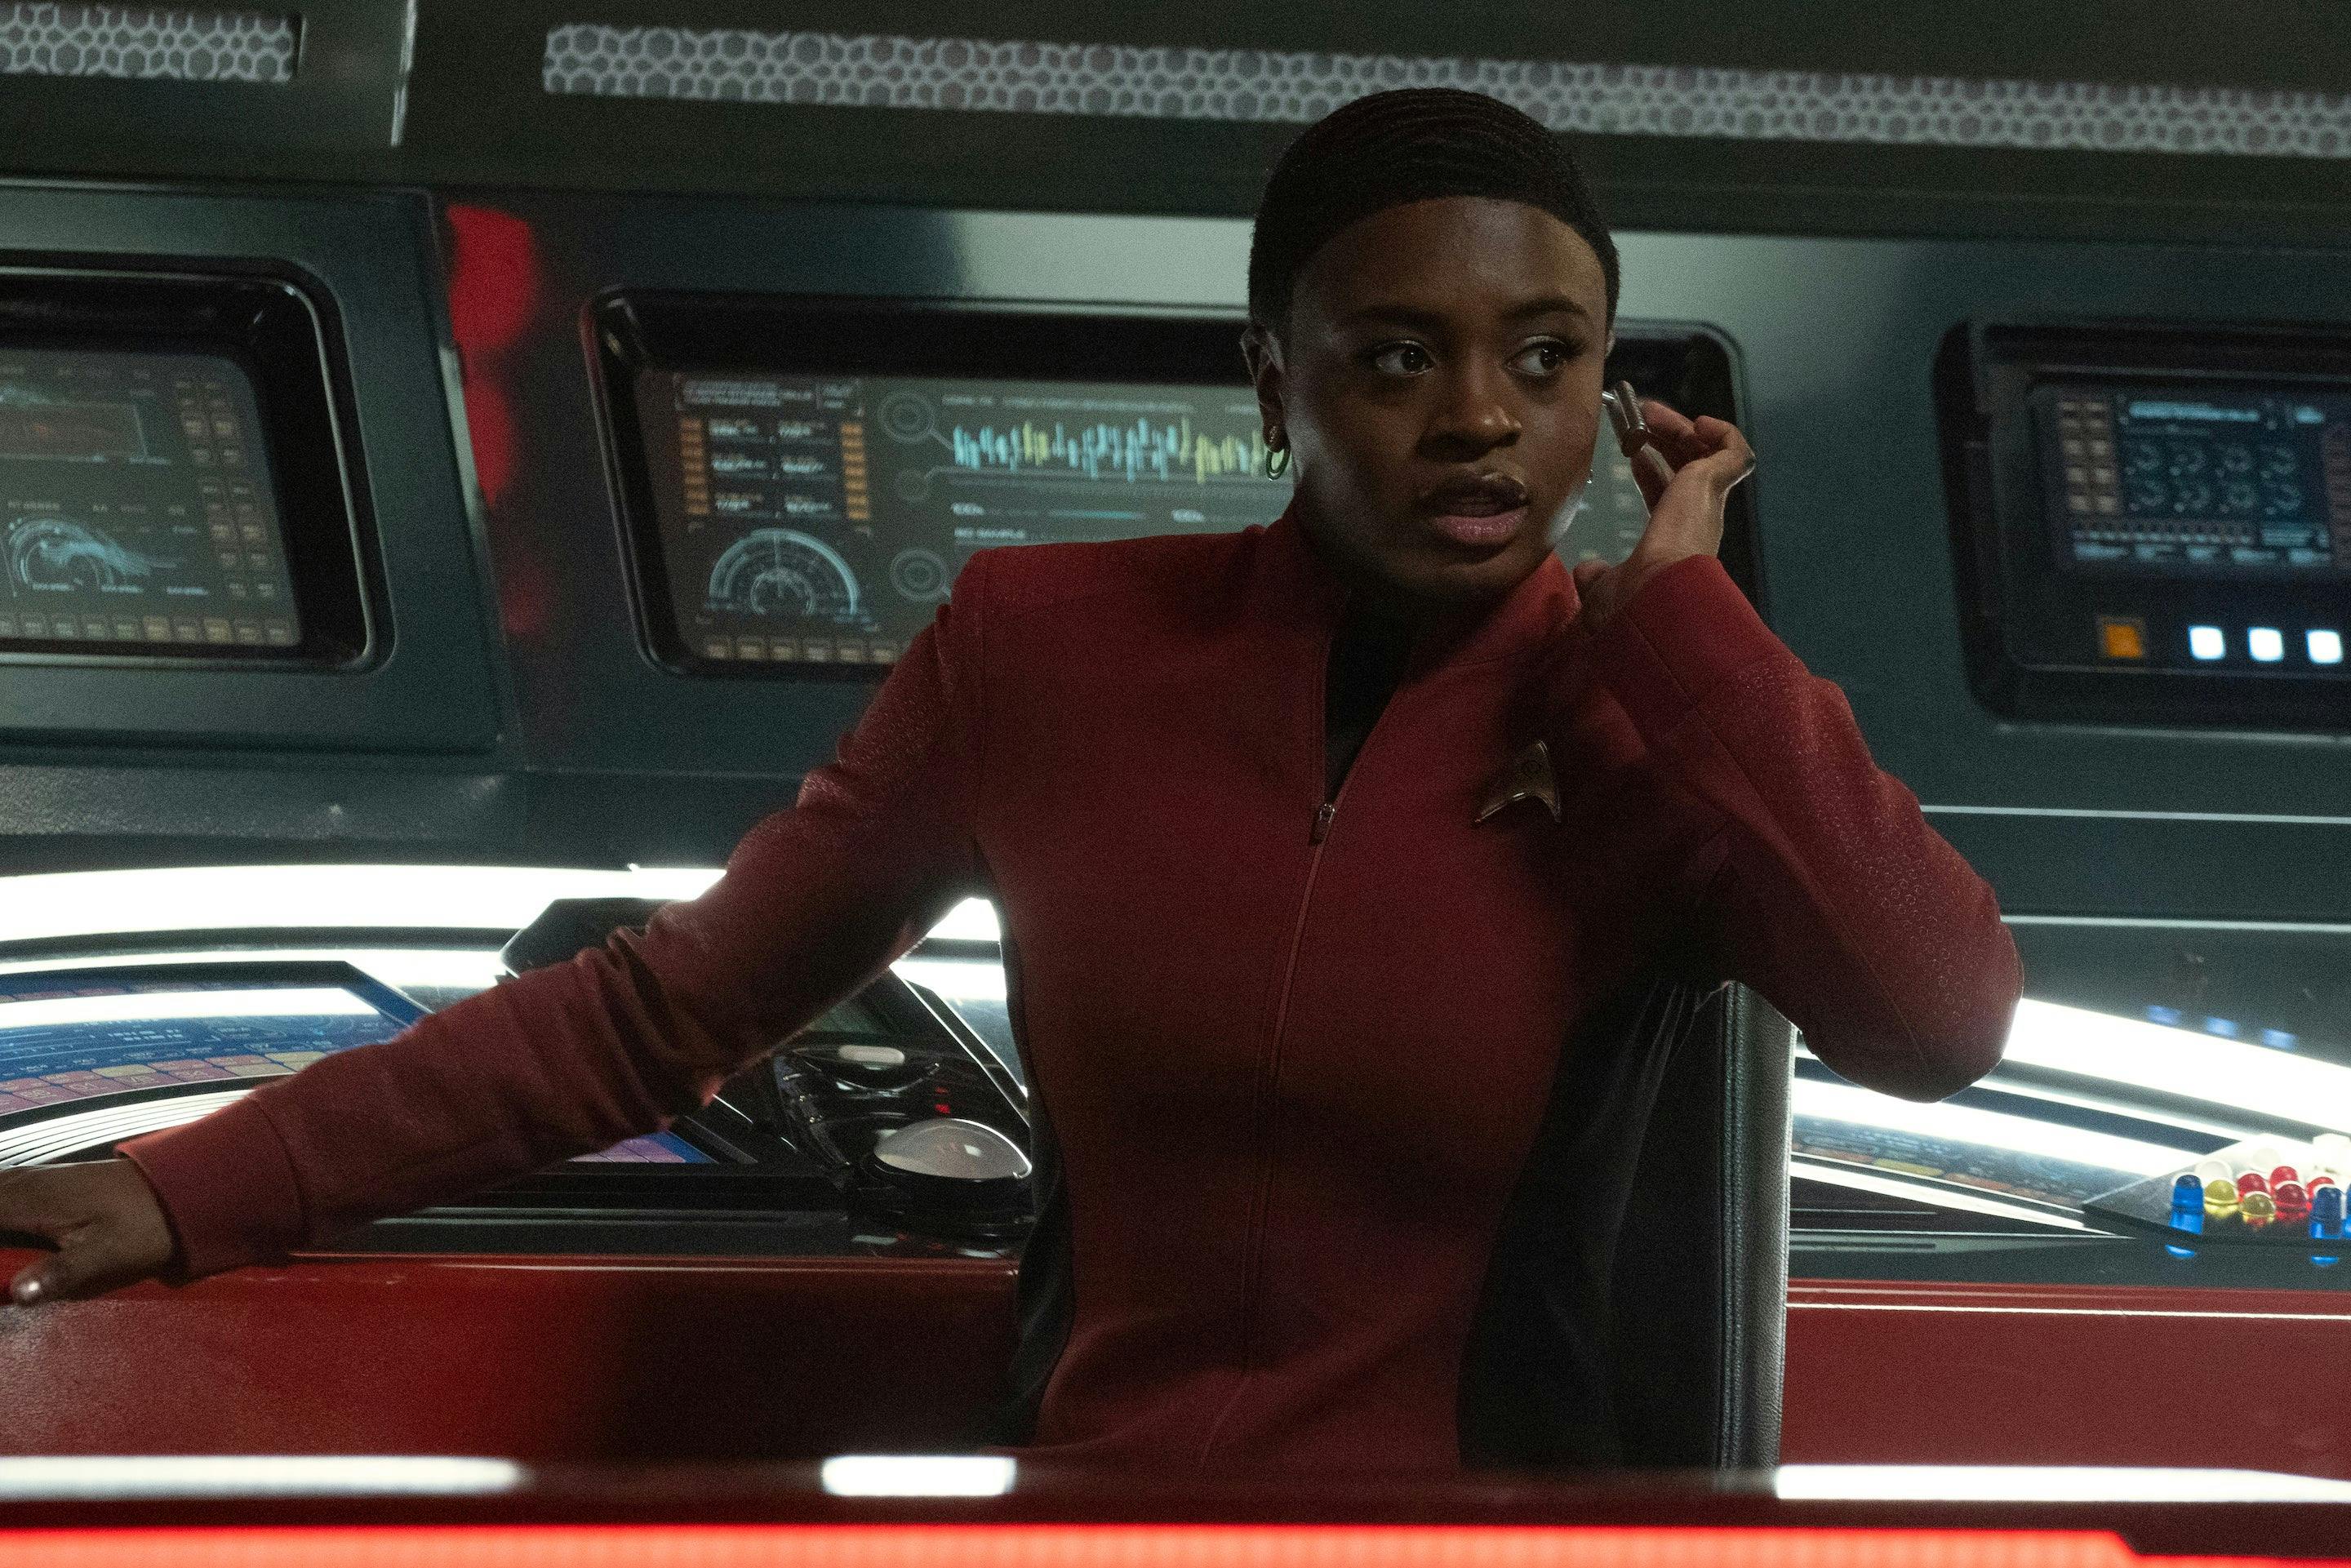 At comms, Uhura looks over at touches her earpiece